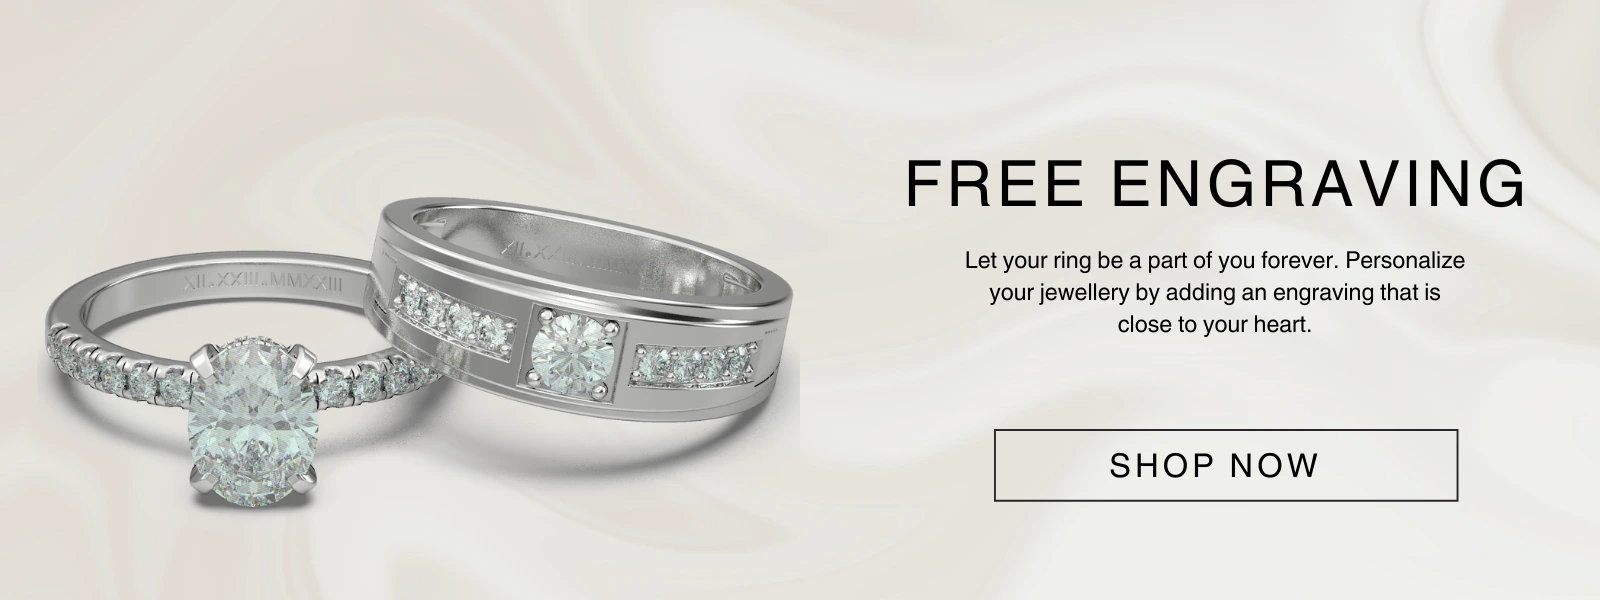 get free engraving for your ring